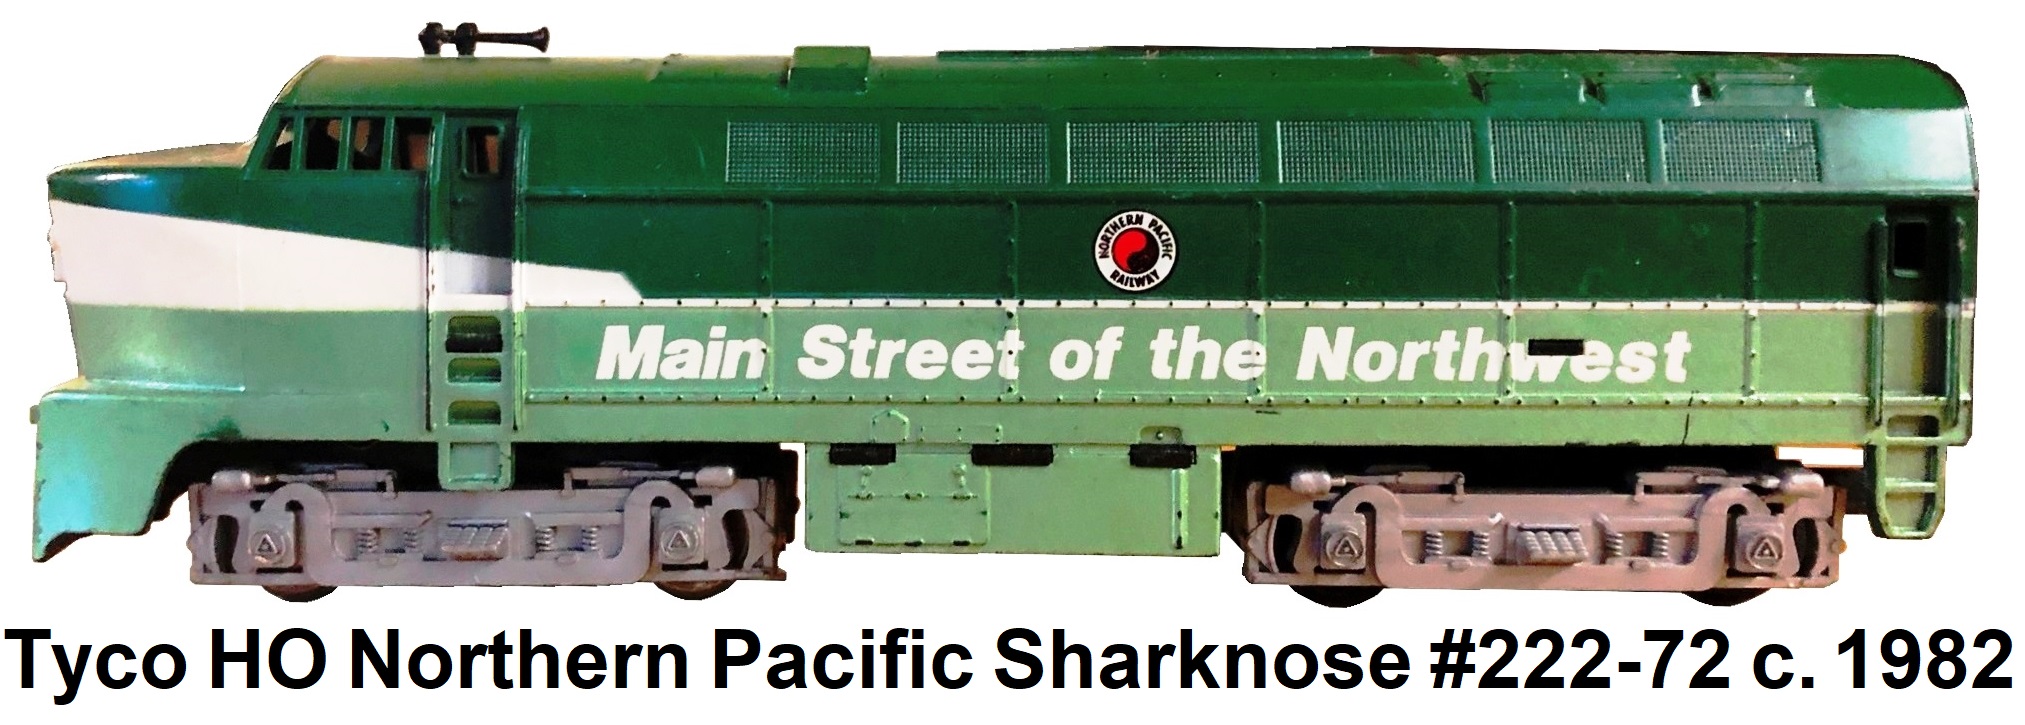 Tyco HO Northern Pacific Sharknose diesel #222-72 -1982 Release